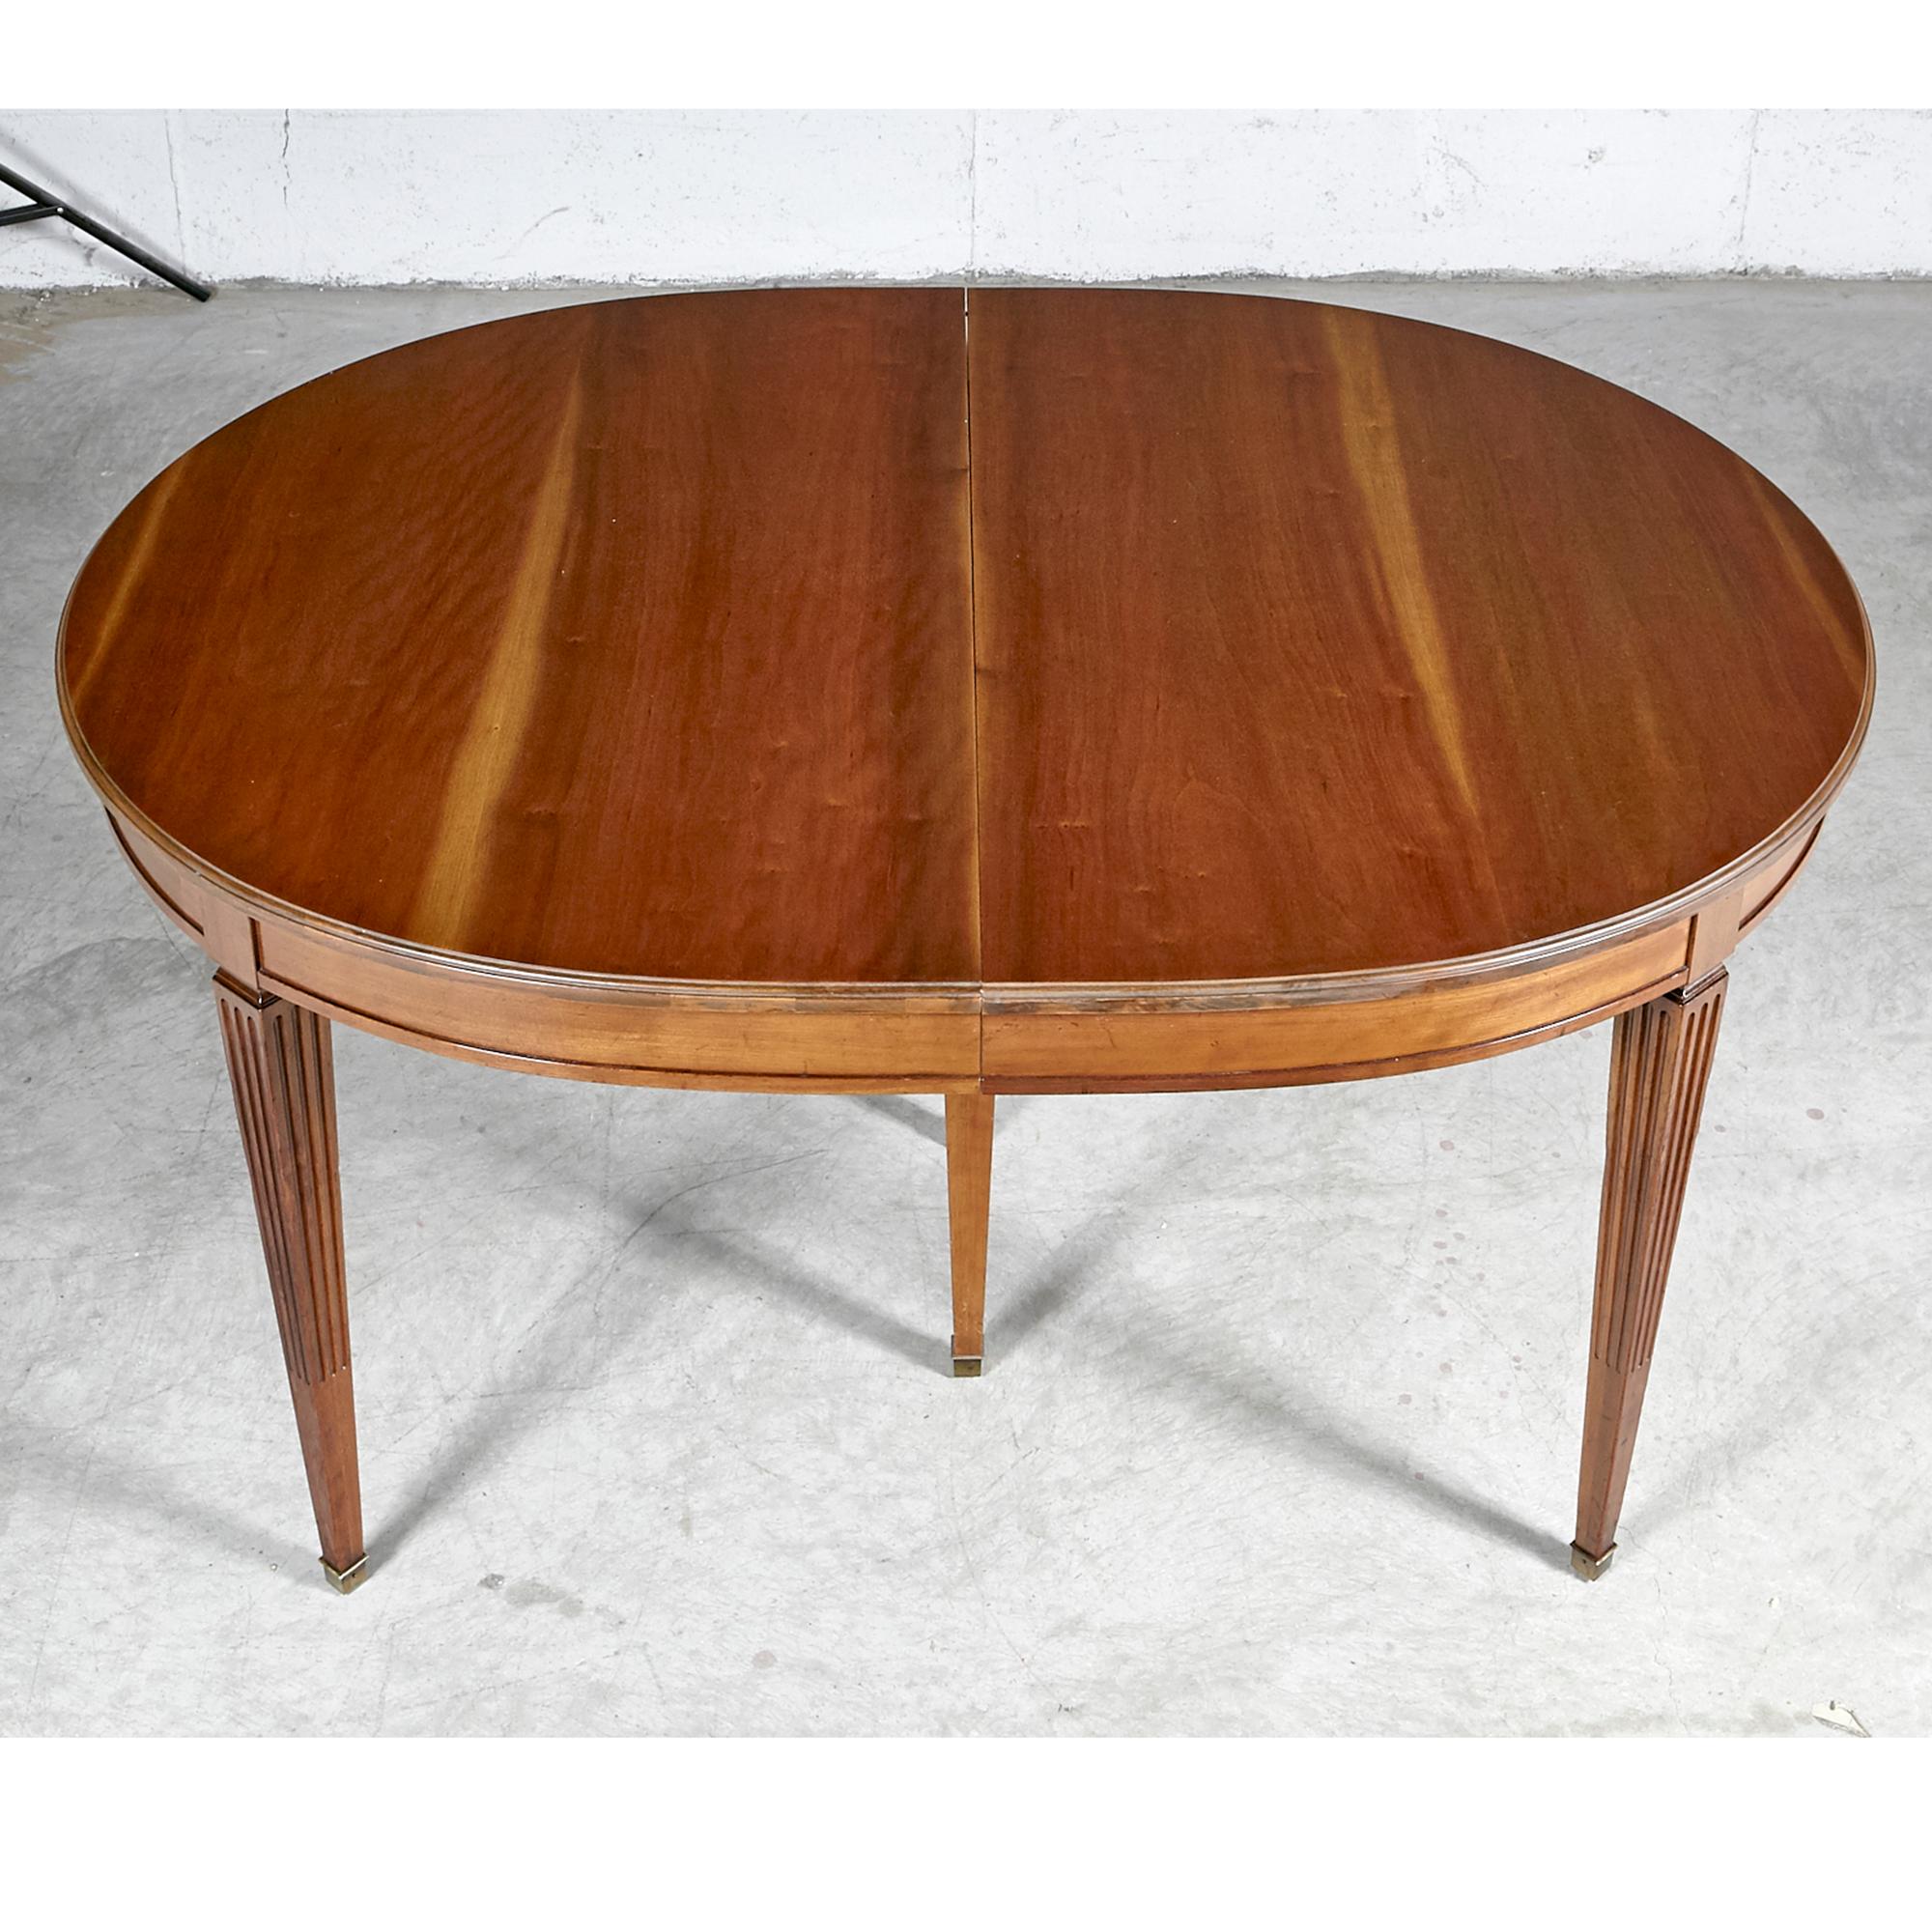 Vintage 1950s cherry wood expandable dining room table by Kindel Furniture Co. The table comes with three extra boards and a center leg for stability. Newly refinished condition. Boards(3): 16